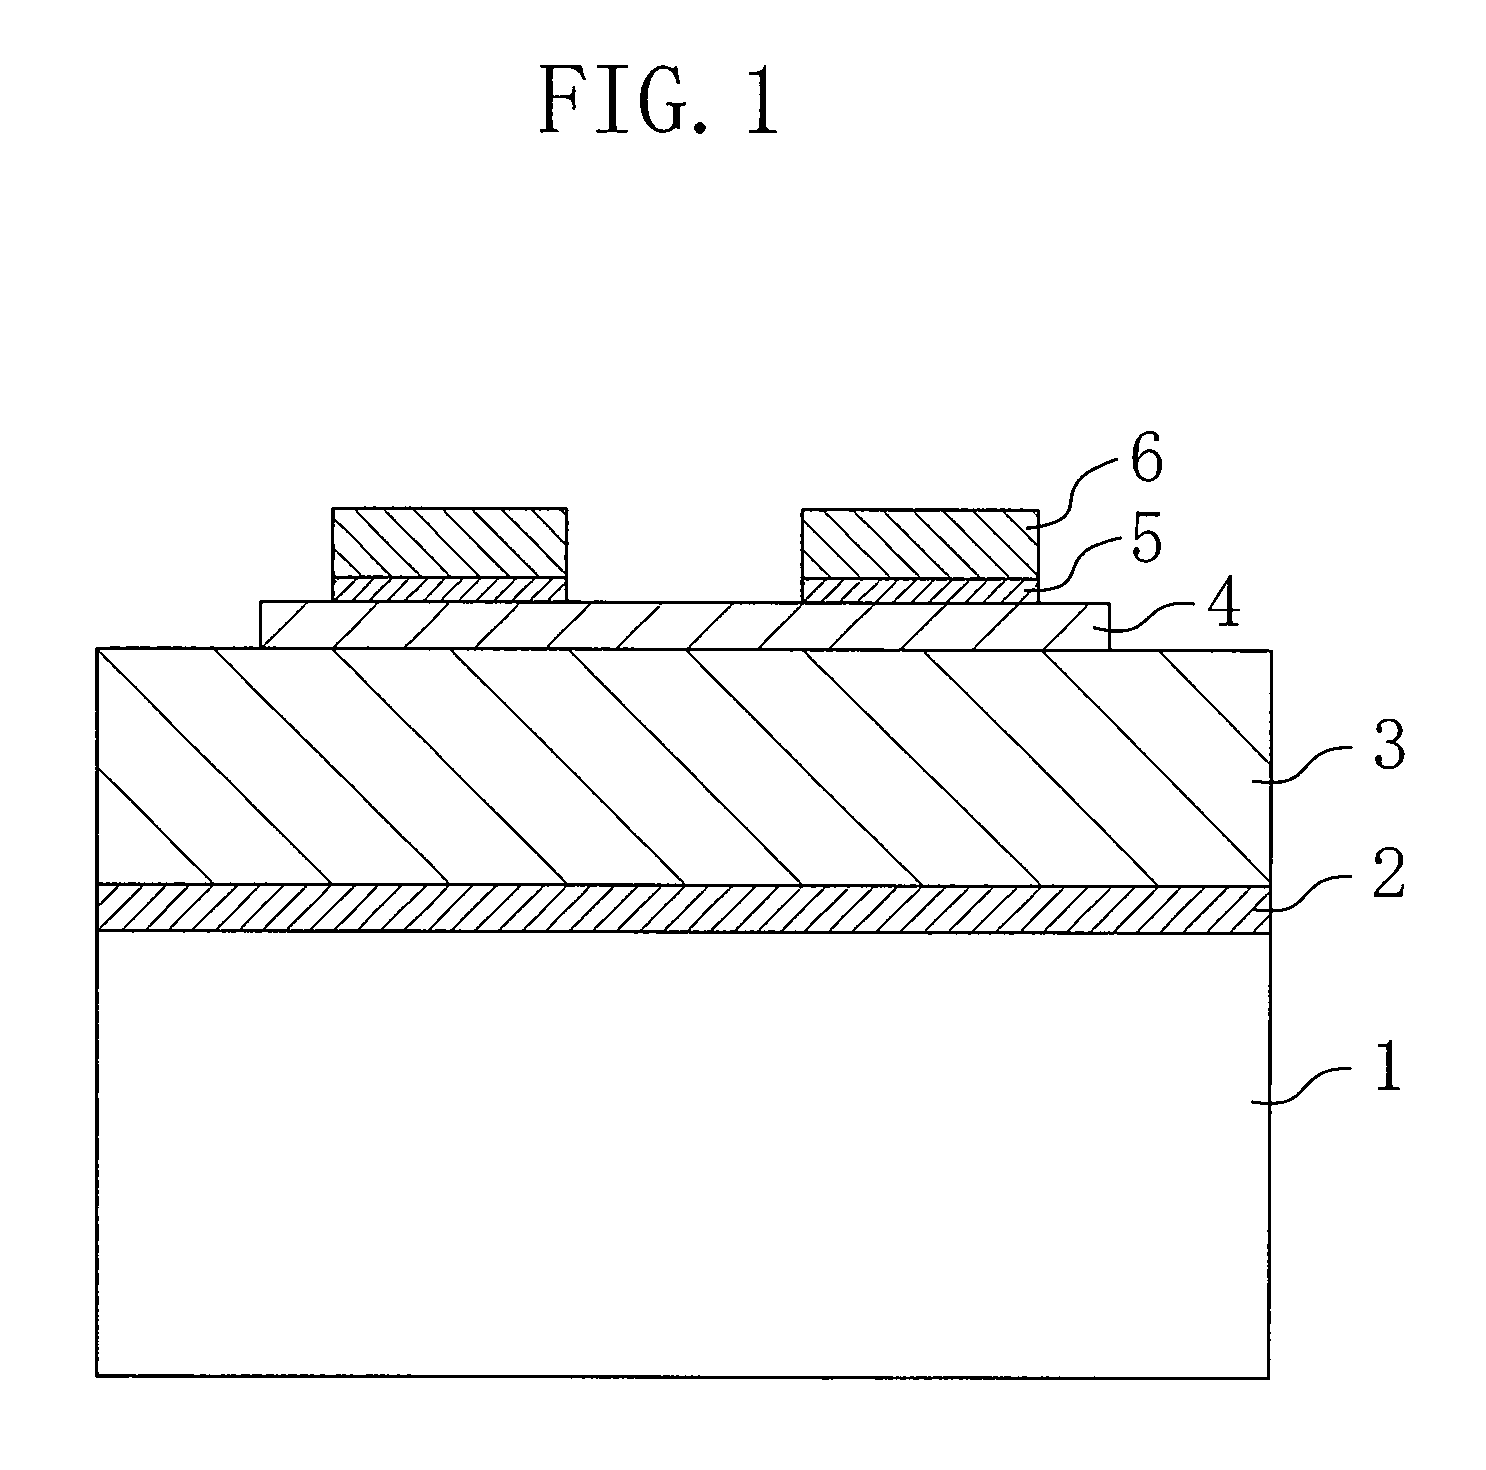 Semiconductor memory device including a semiconductor film made of a material having a spontaneous polarization and method for fabricating the same